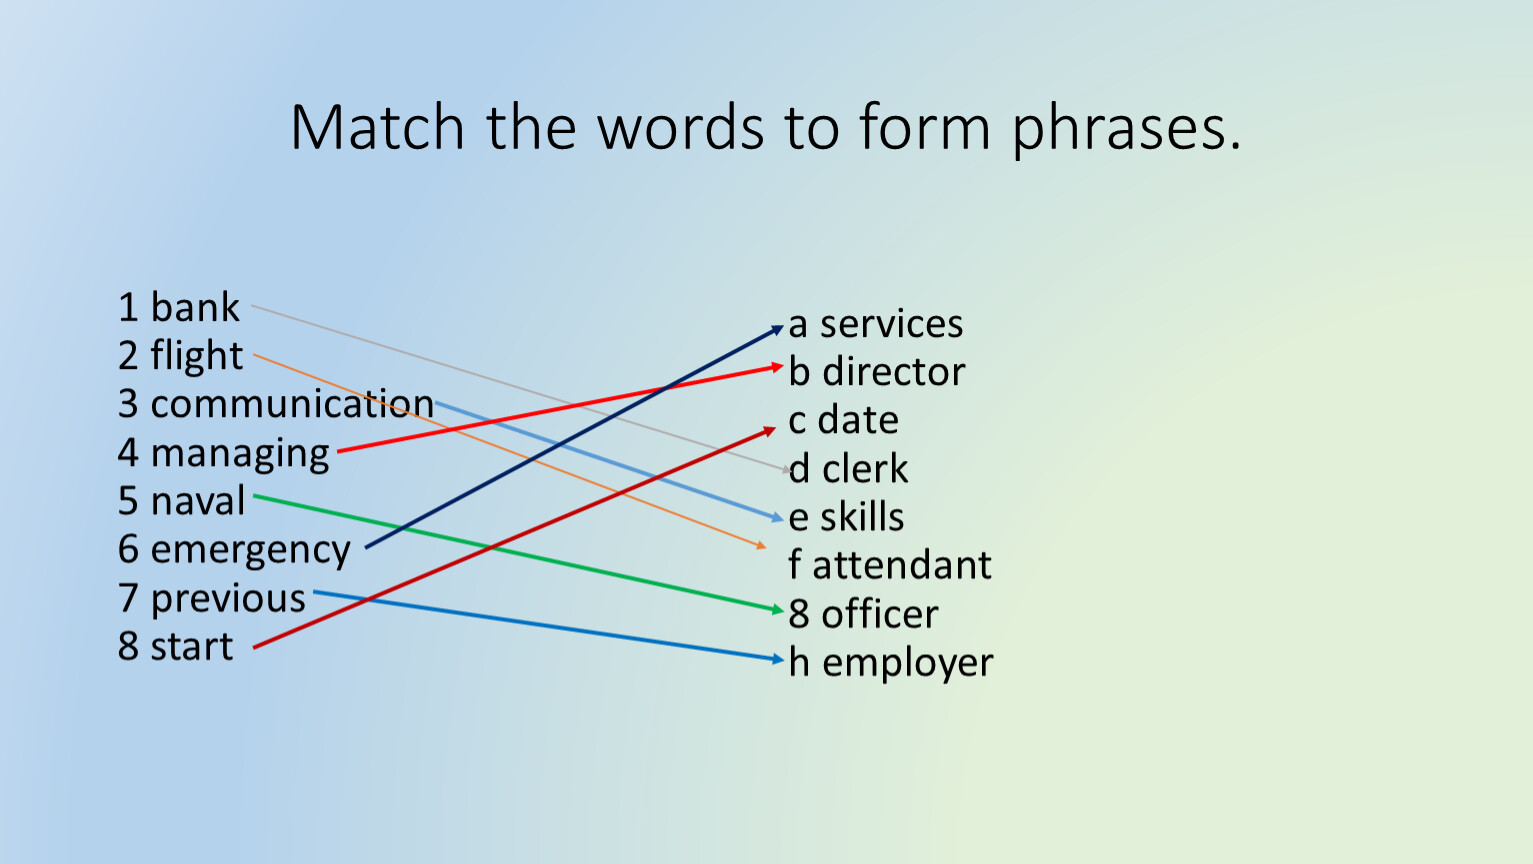 Match the words to form phrases 